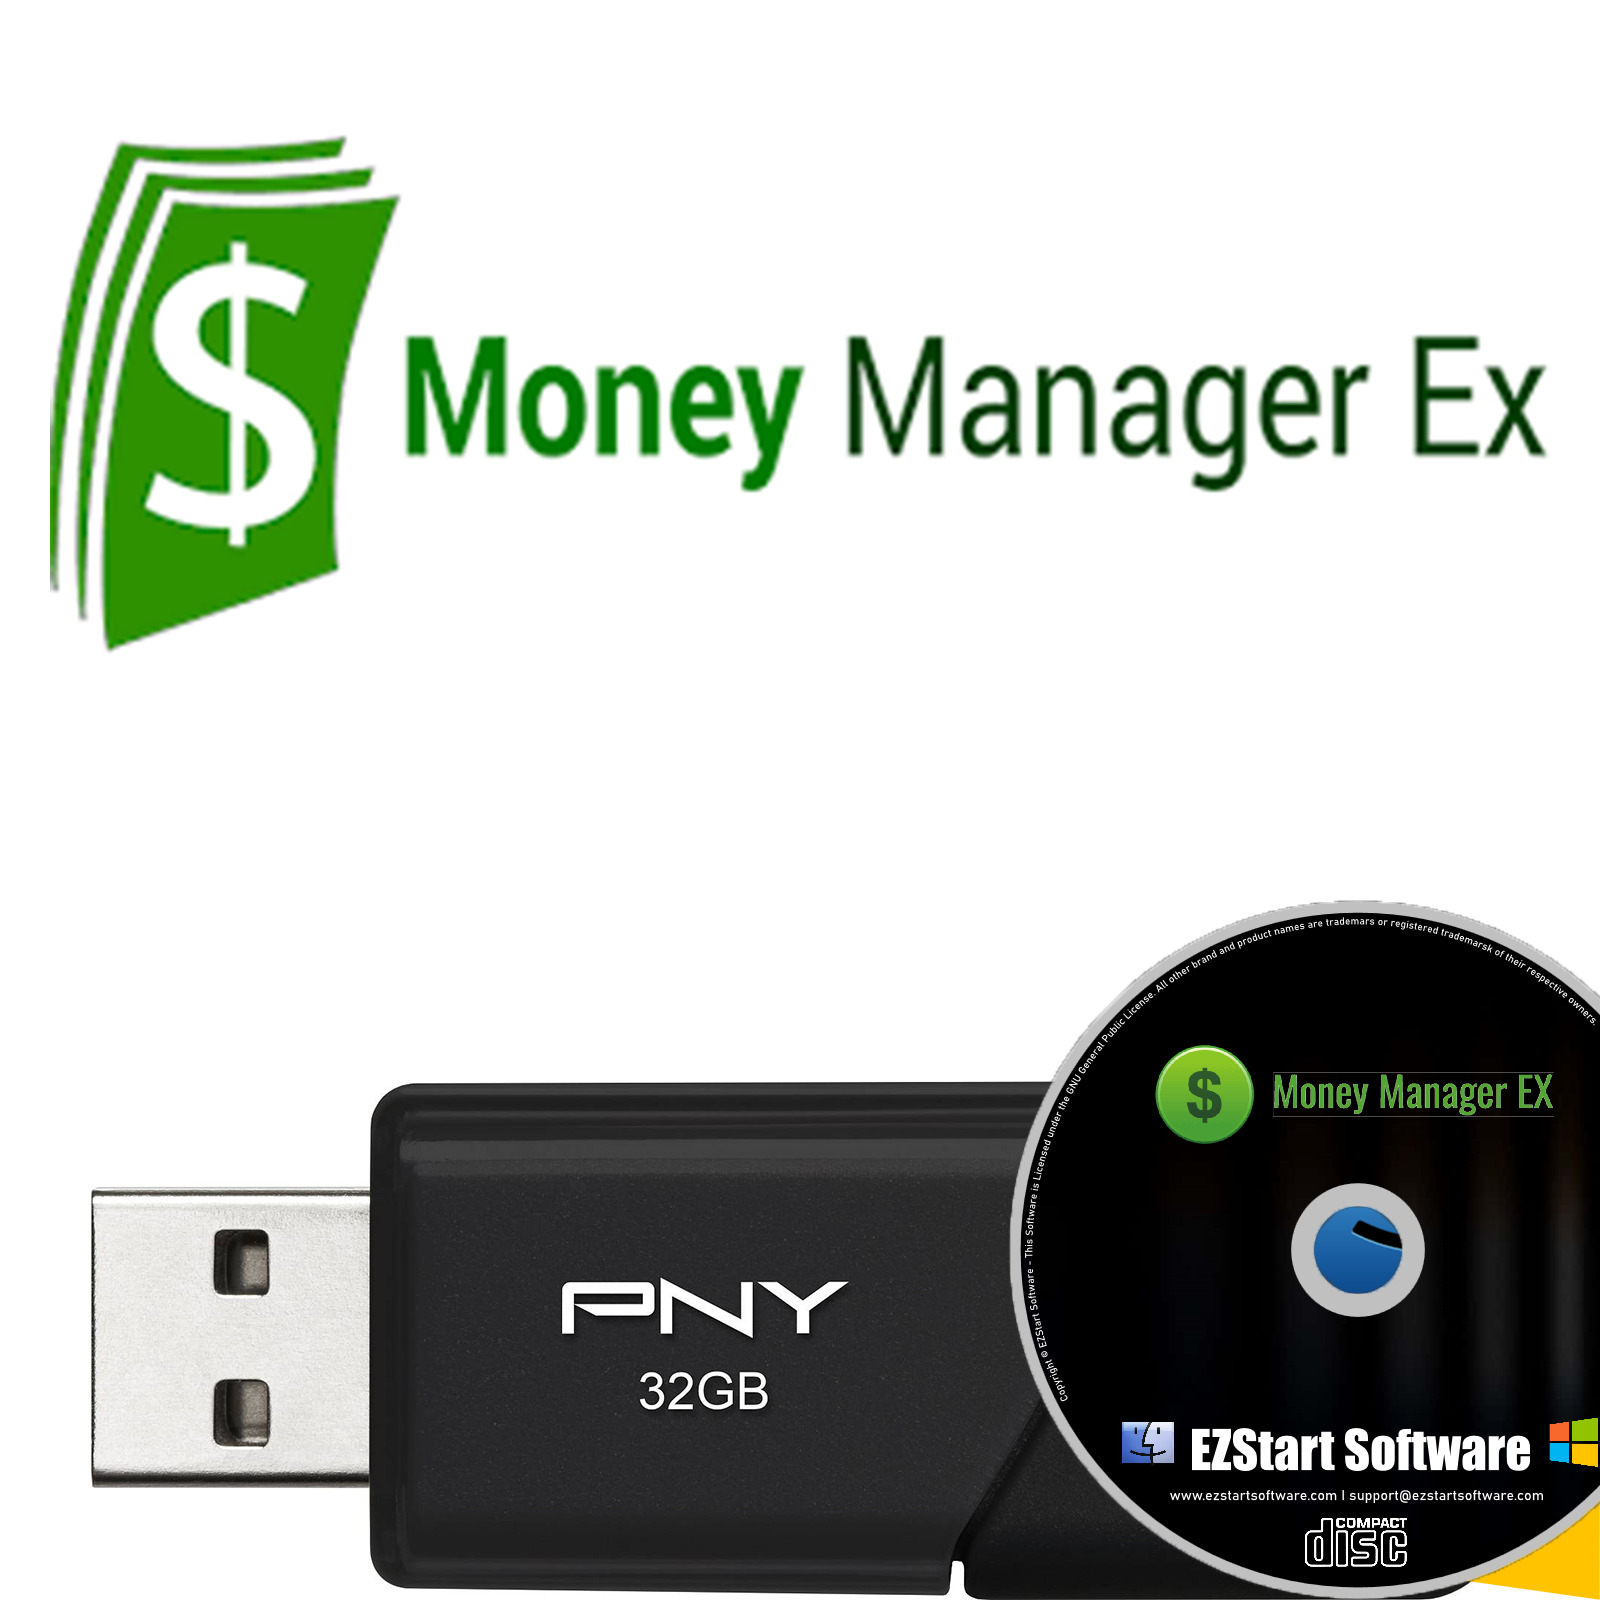 Money Manager Ex Easy to Use, Money Management Application on CD/USB